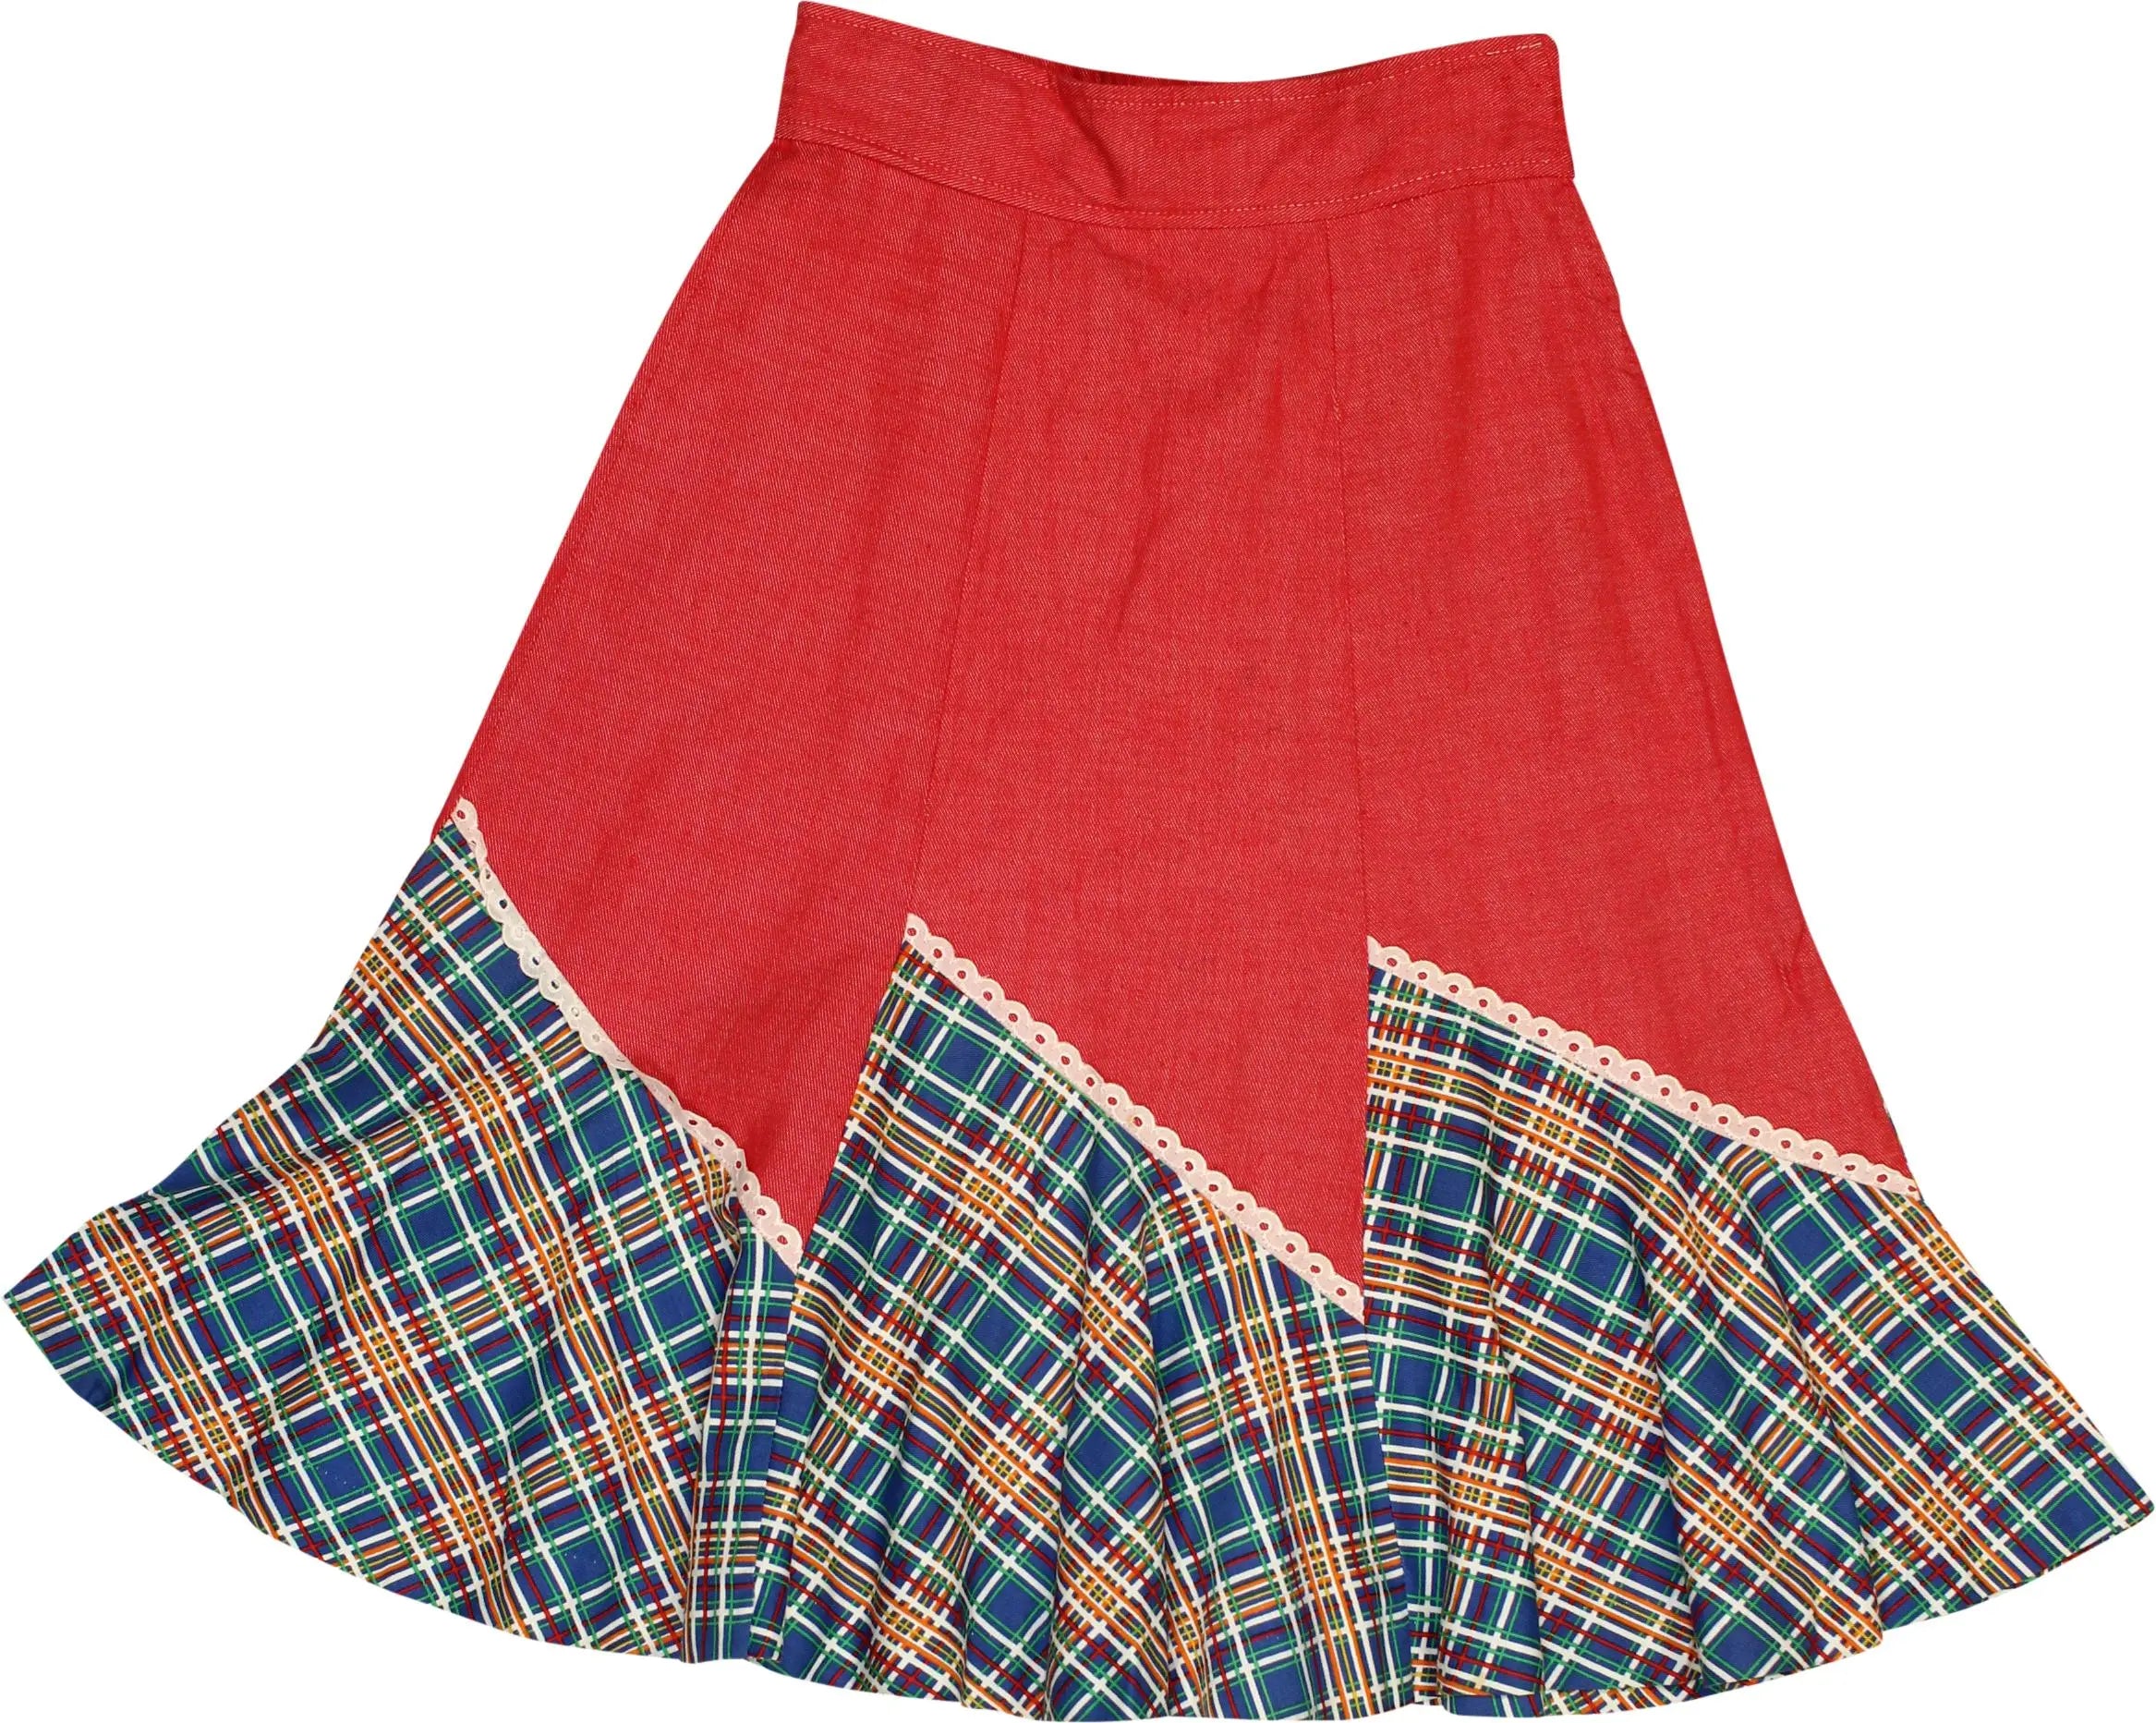 Unknown - Red midi skirt- ThriftTale.com - Vintage and second handclothing